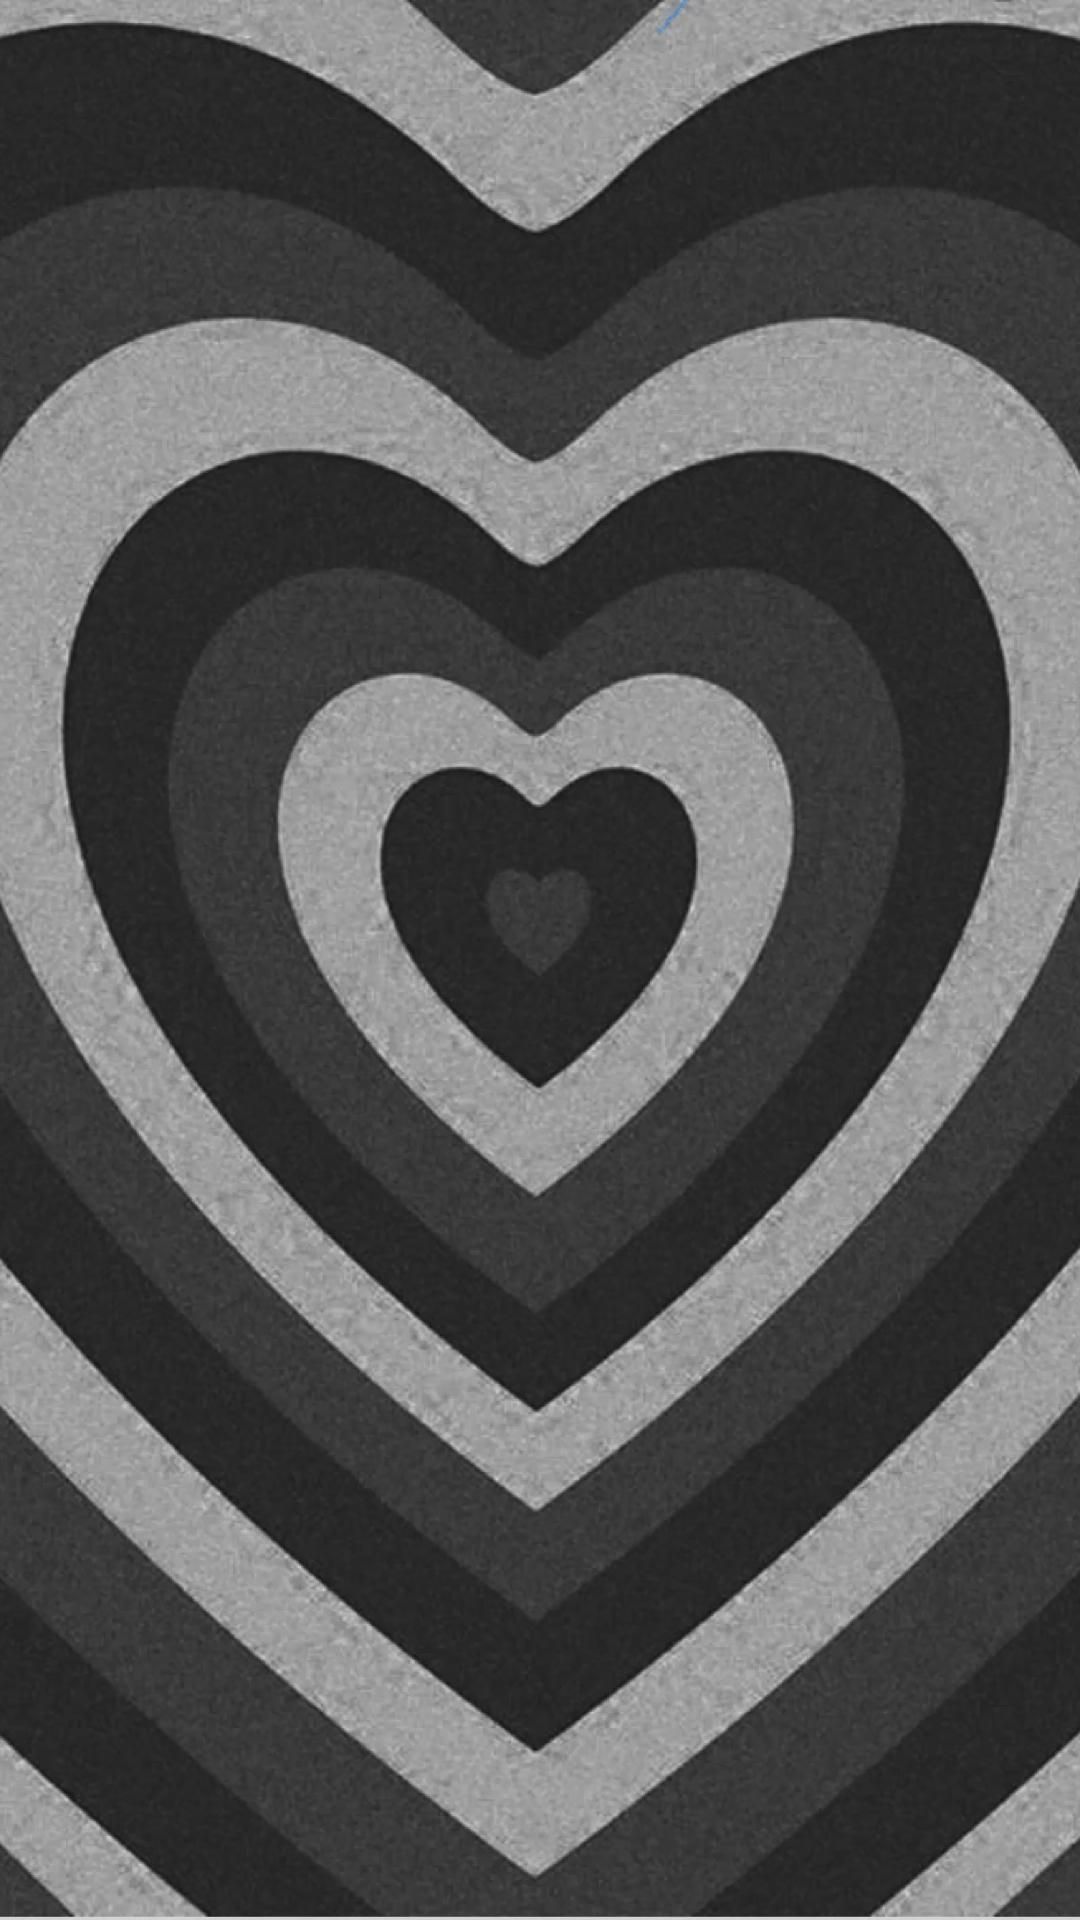 Black and white hearts background - Black heart